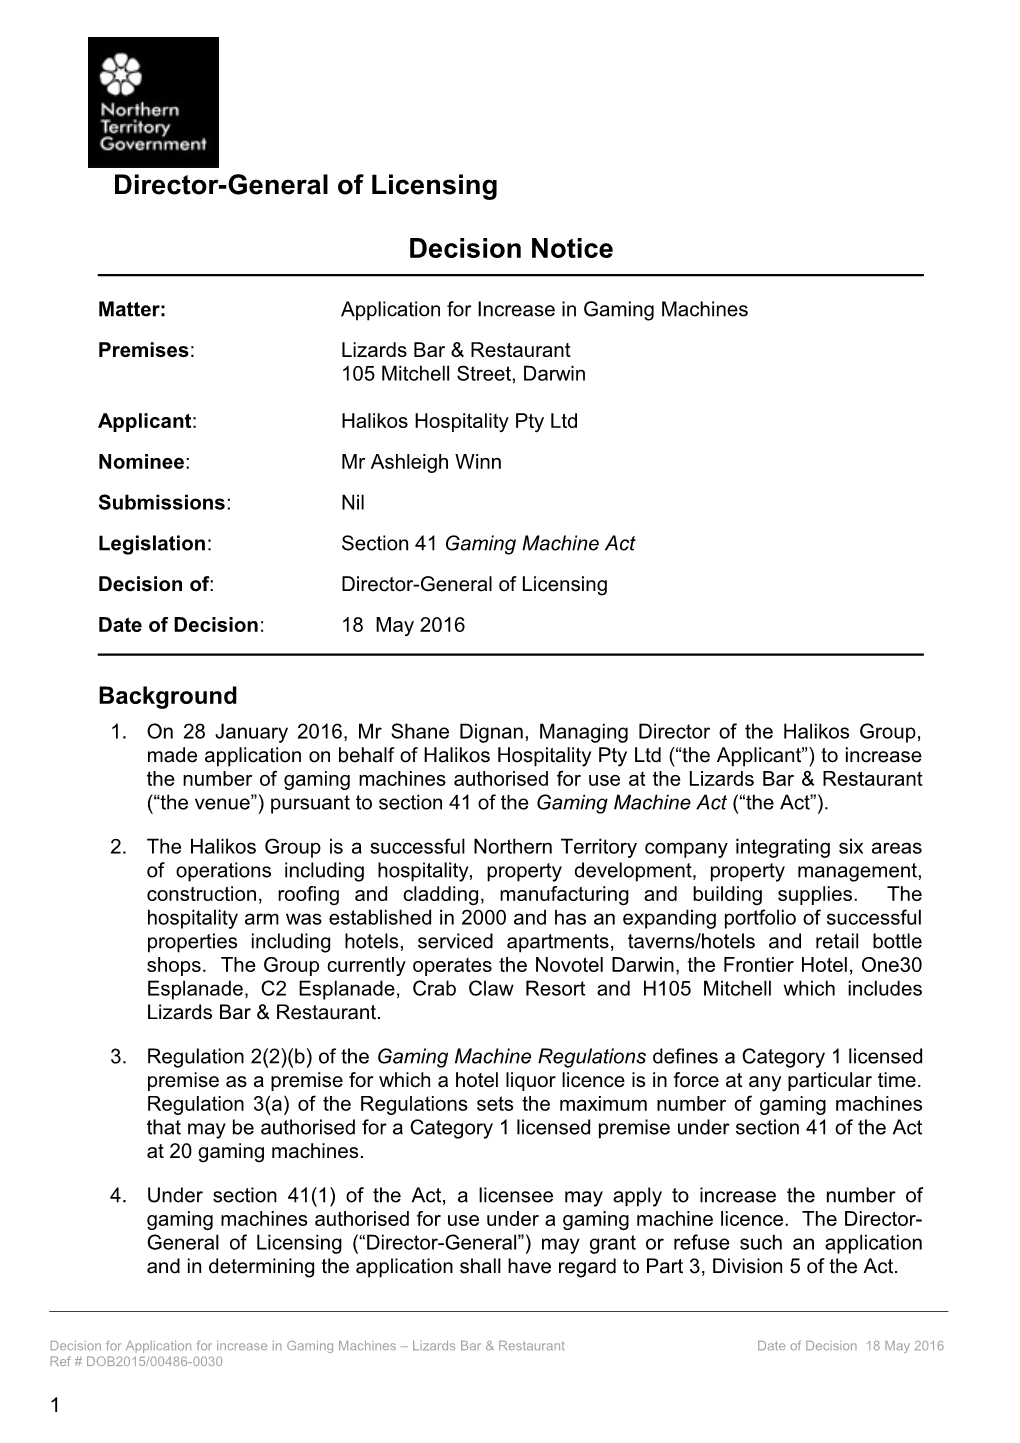 Decision Notice for Shenannigans Irish Pub - Application for Increase in Gaming Machines